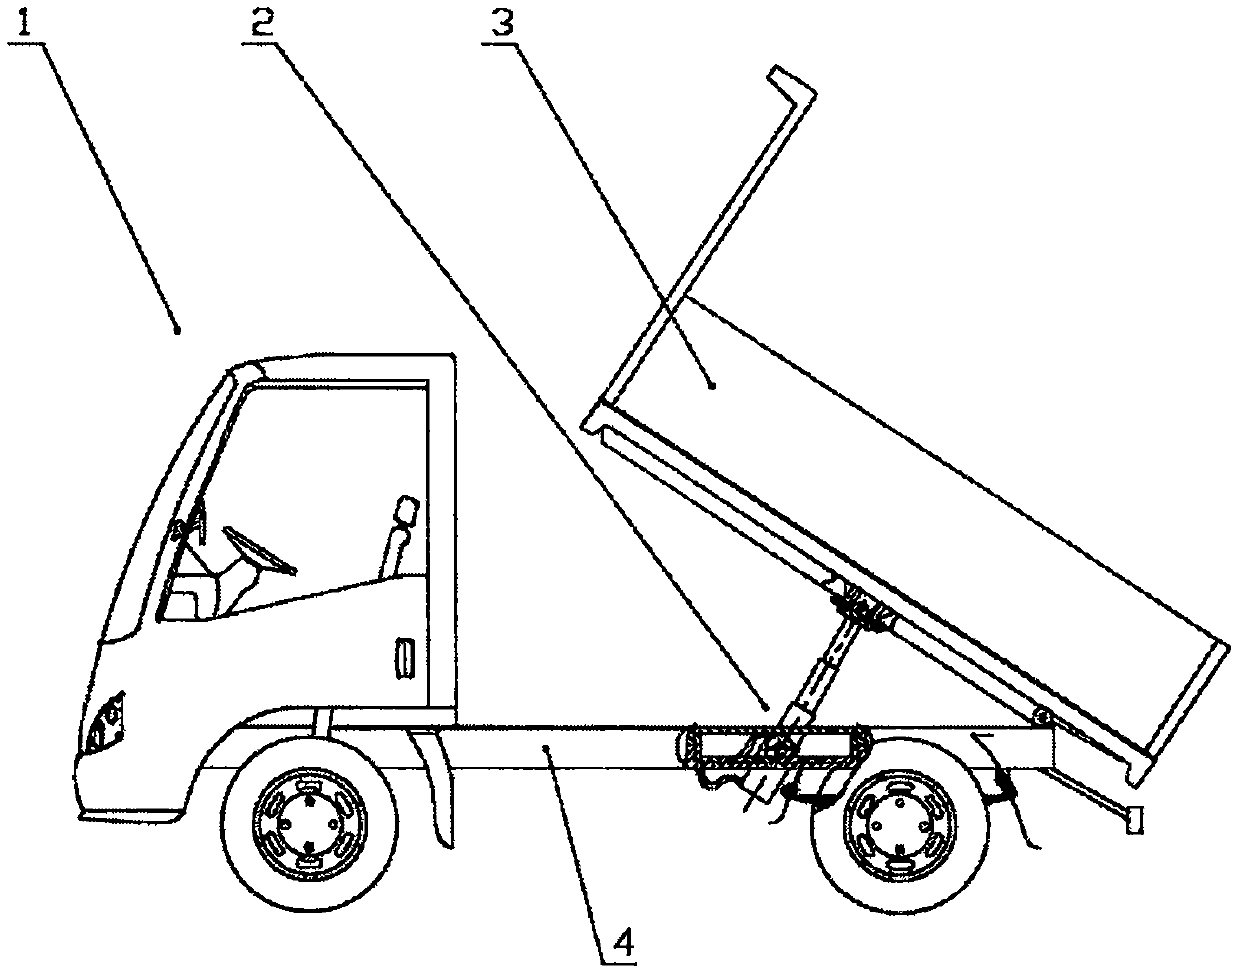 Dumper with constant-angle direct-push type lifting mechanism